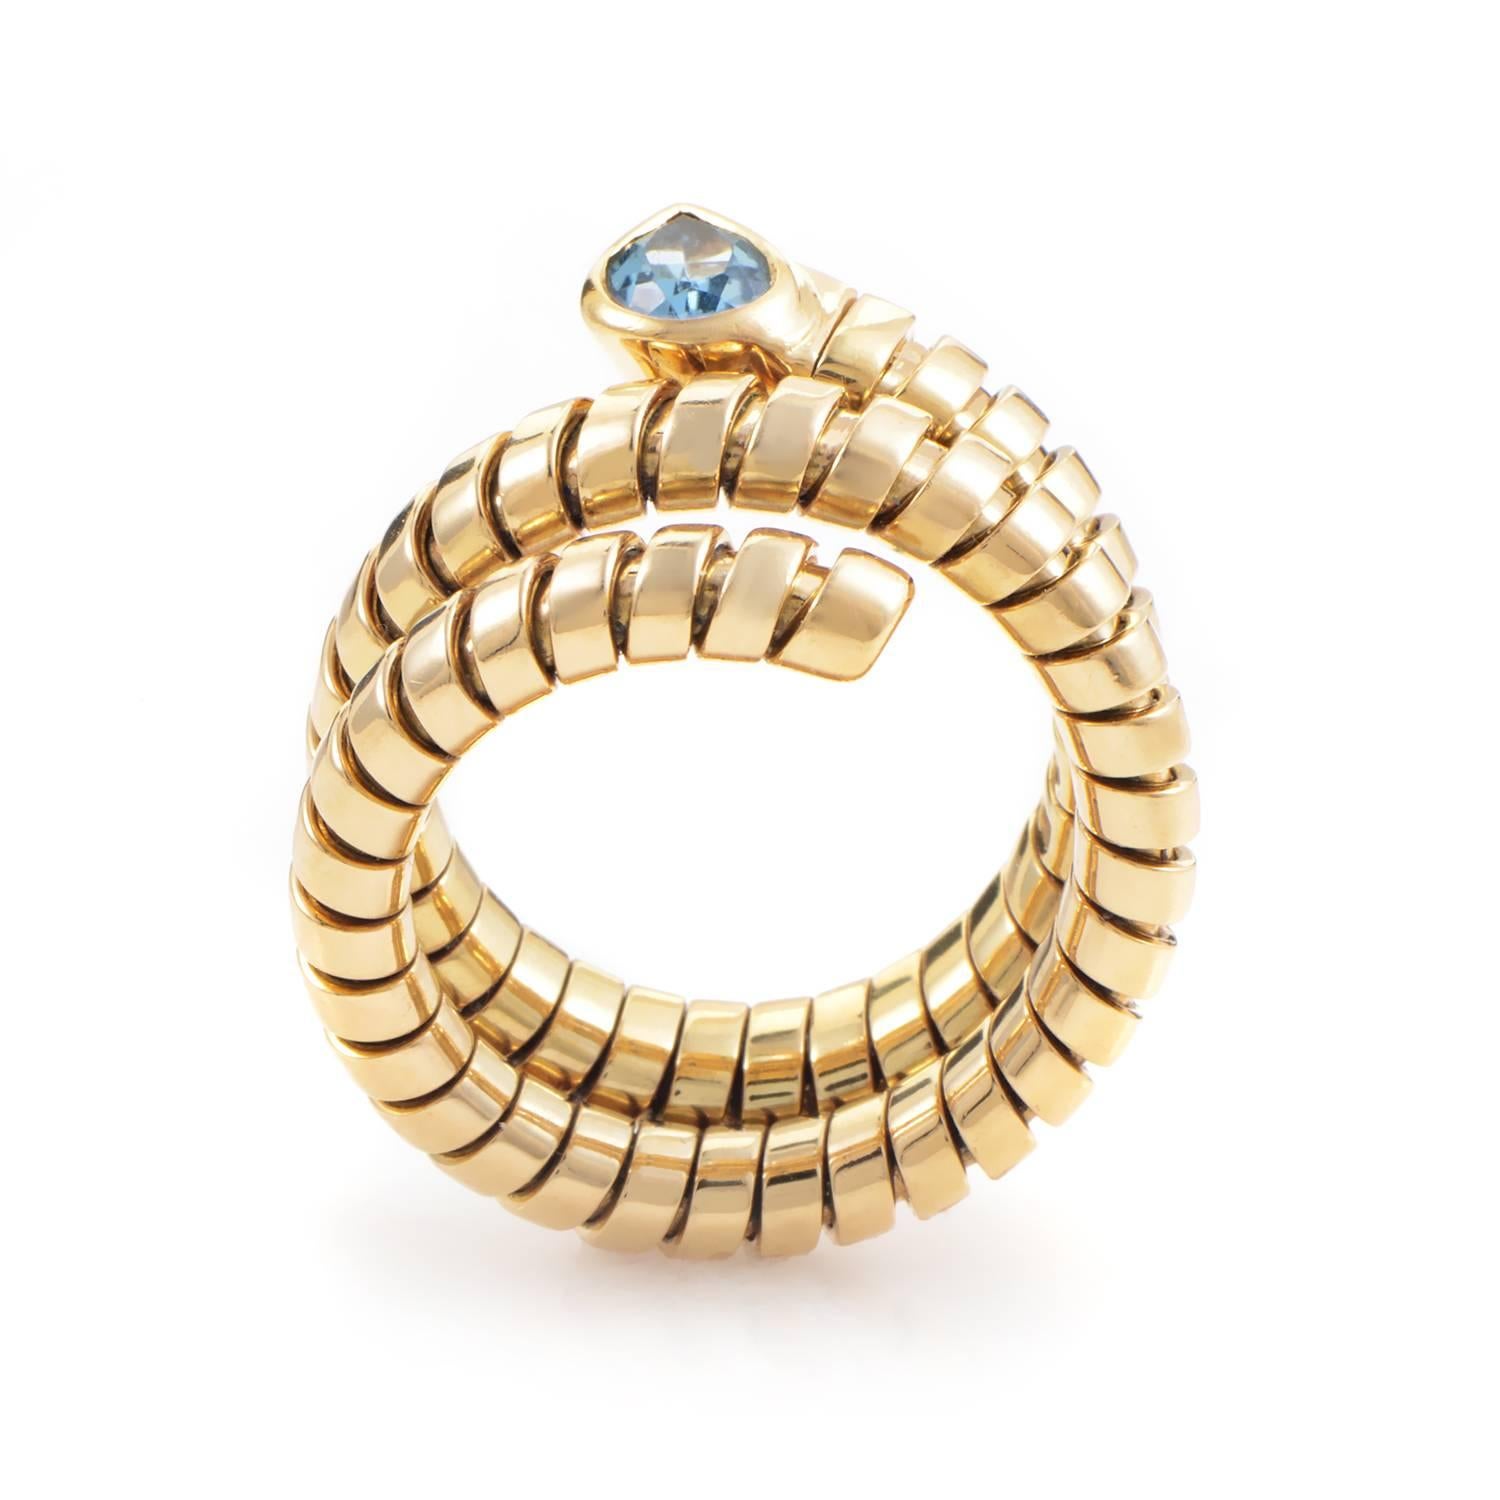 With serpentine sleekness this Tubogas ring wraps snugly three times in a glamorous grasp of 18K yellow gold. Leading this rivulet of precious slivers is the ripe setting of topaz that punctuates the ring's rippling curves. Compelling style and